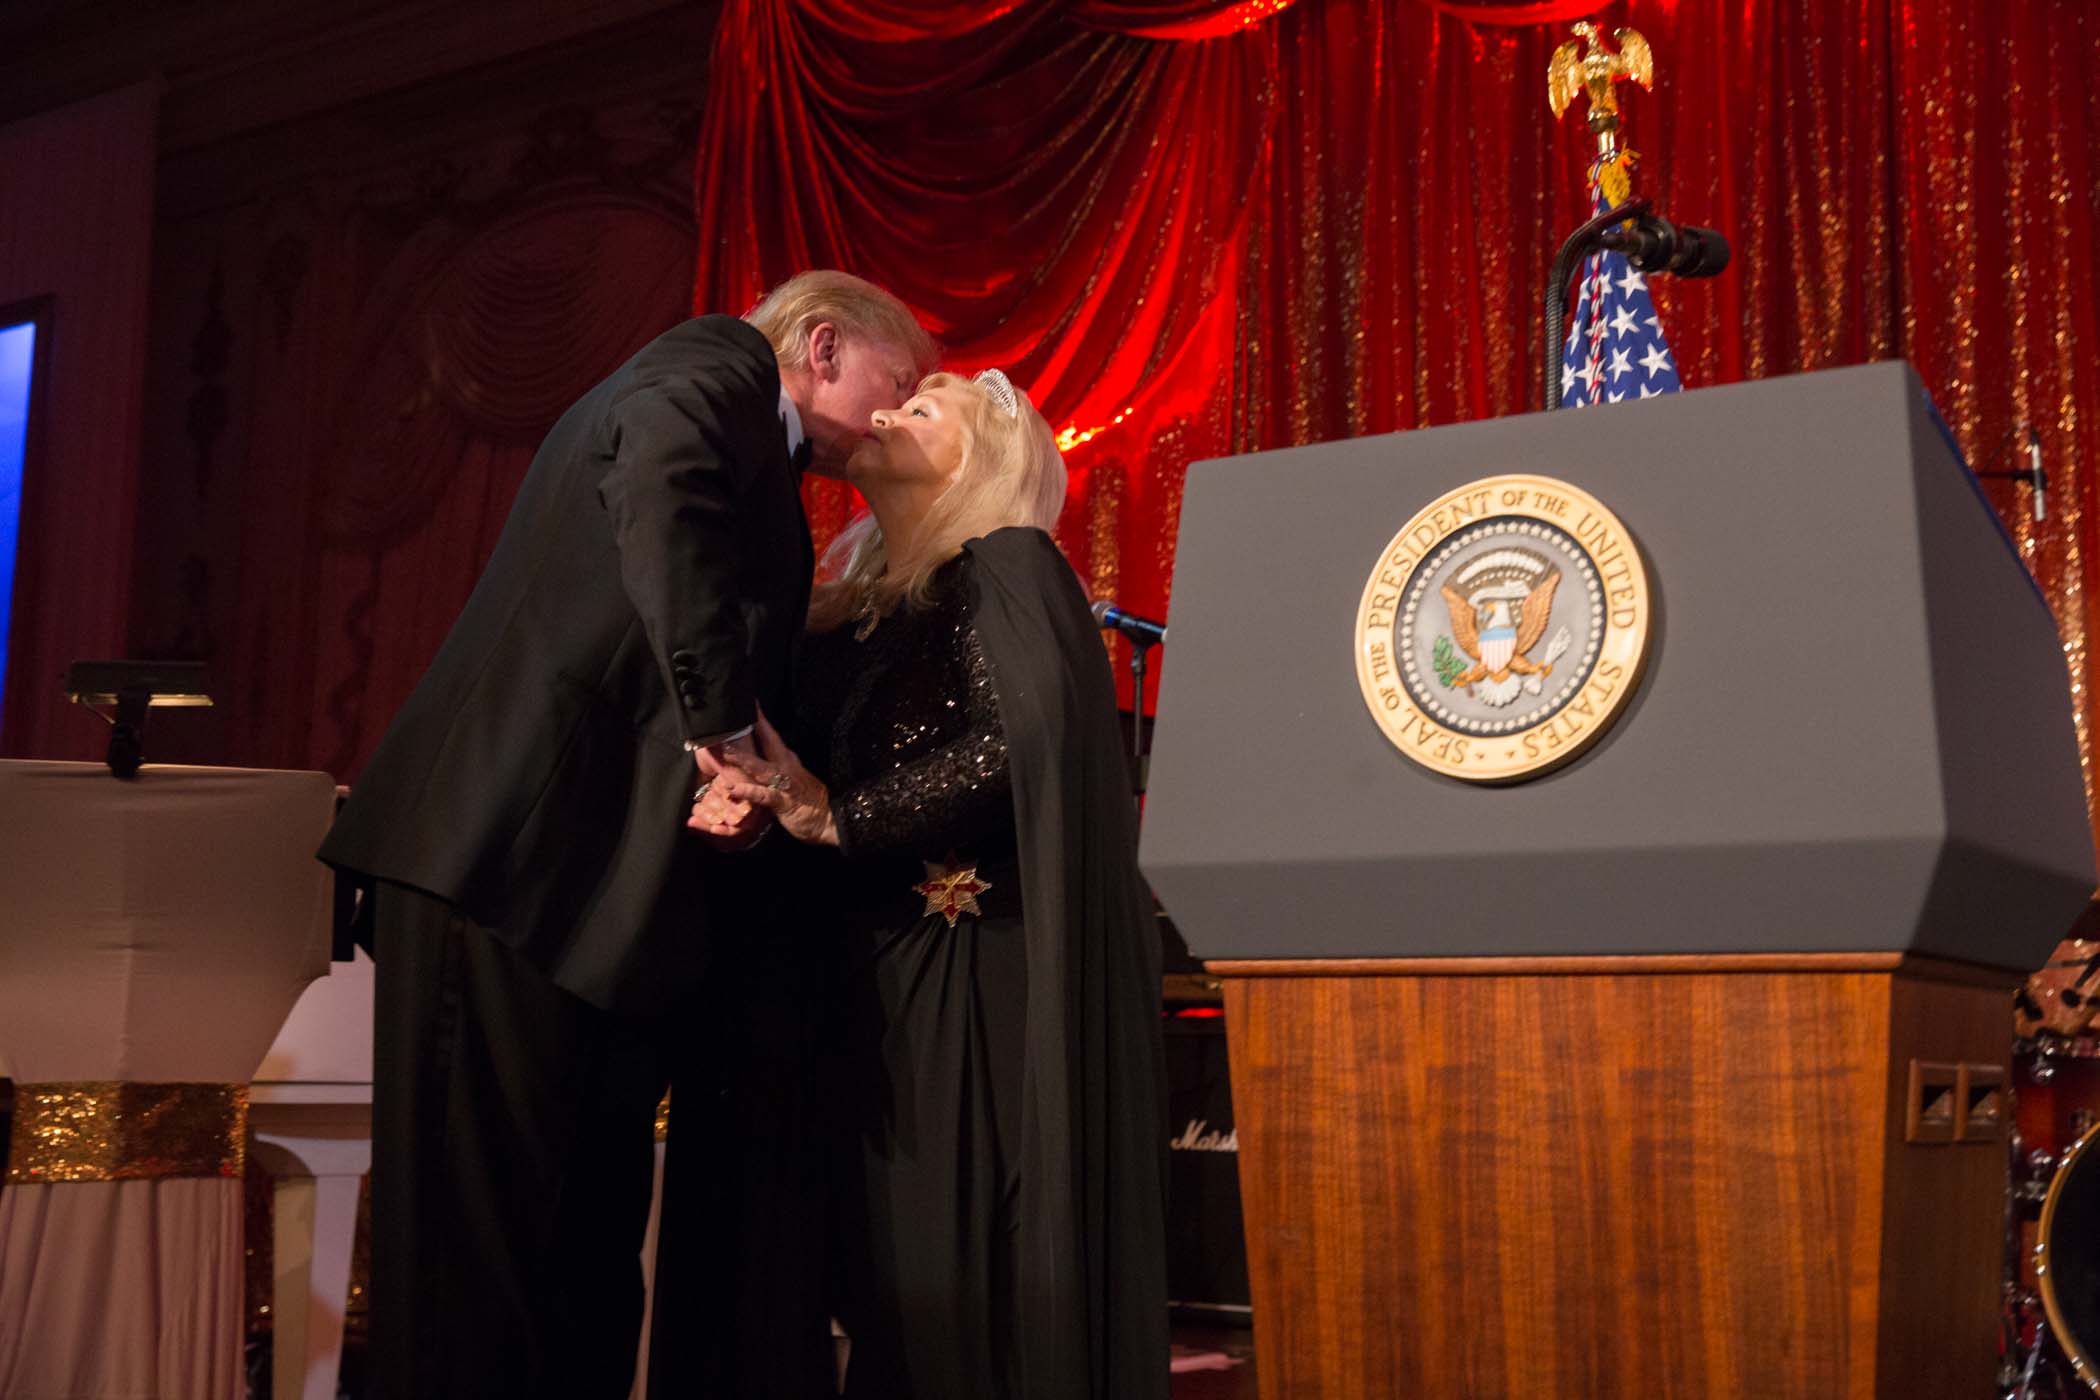 PHOTO: President Donald Trump and Chairwomen Janet Cafaro at the 60th International Red Cross Ball at Mar-a-lago on Feb. 4, 2017.